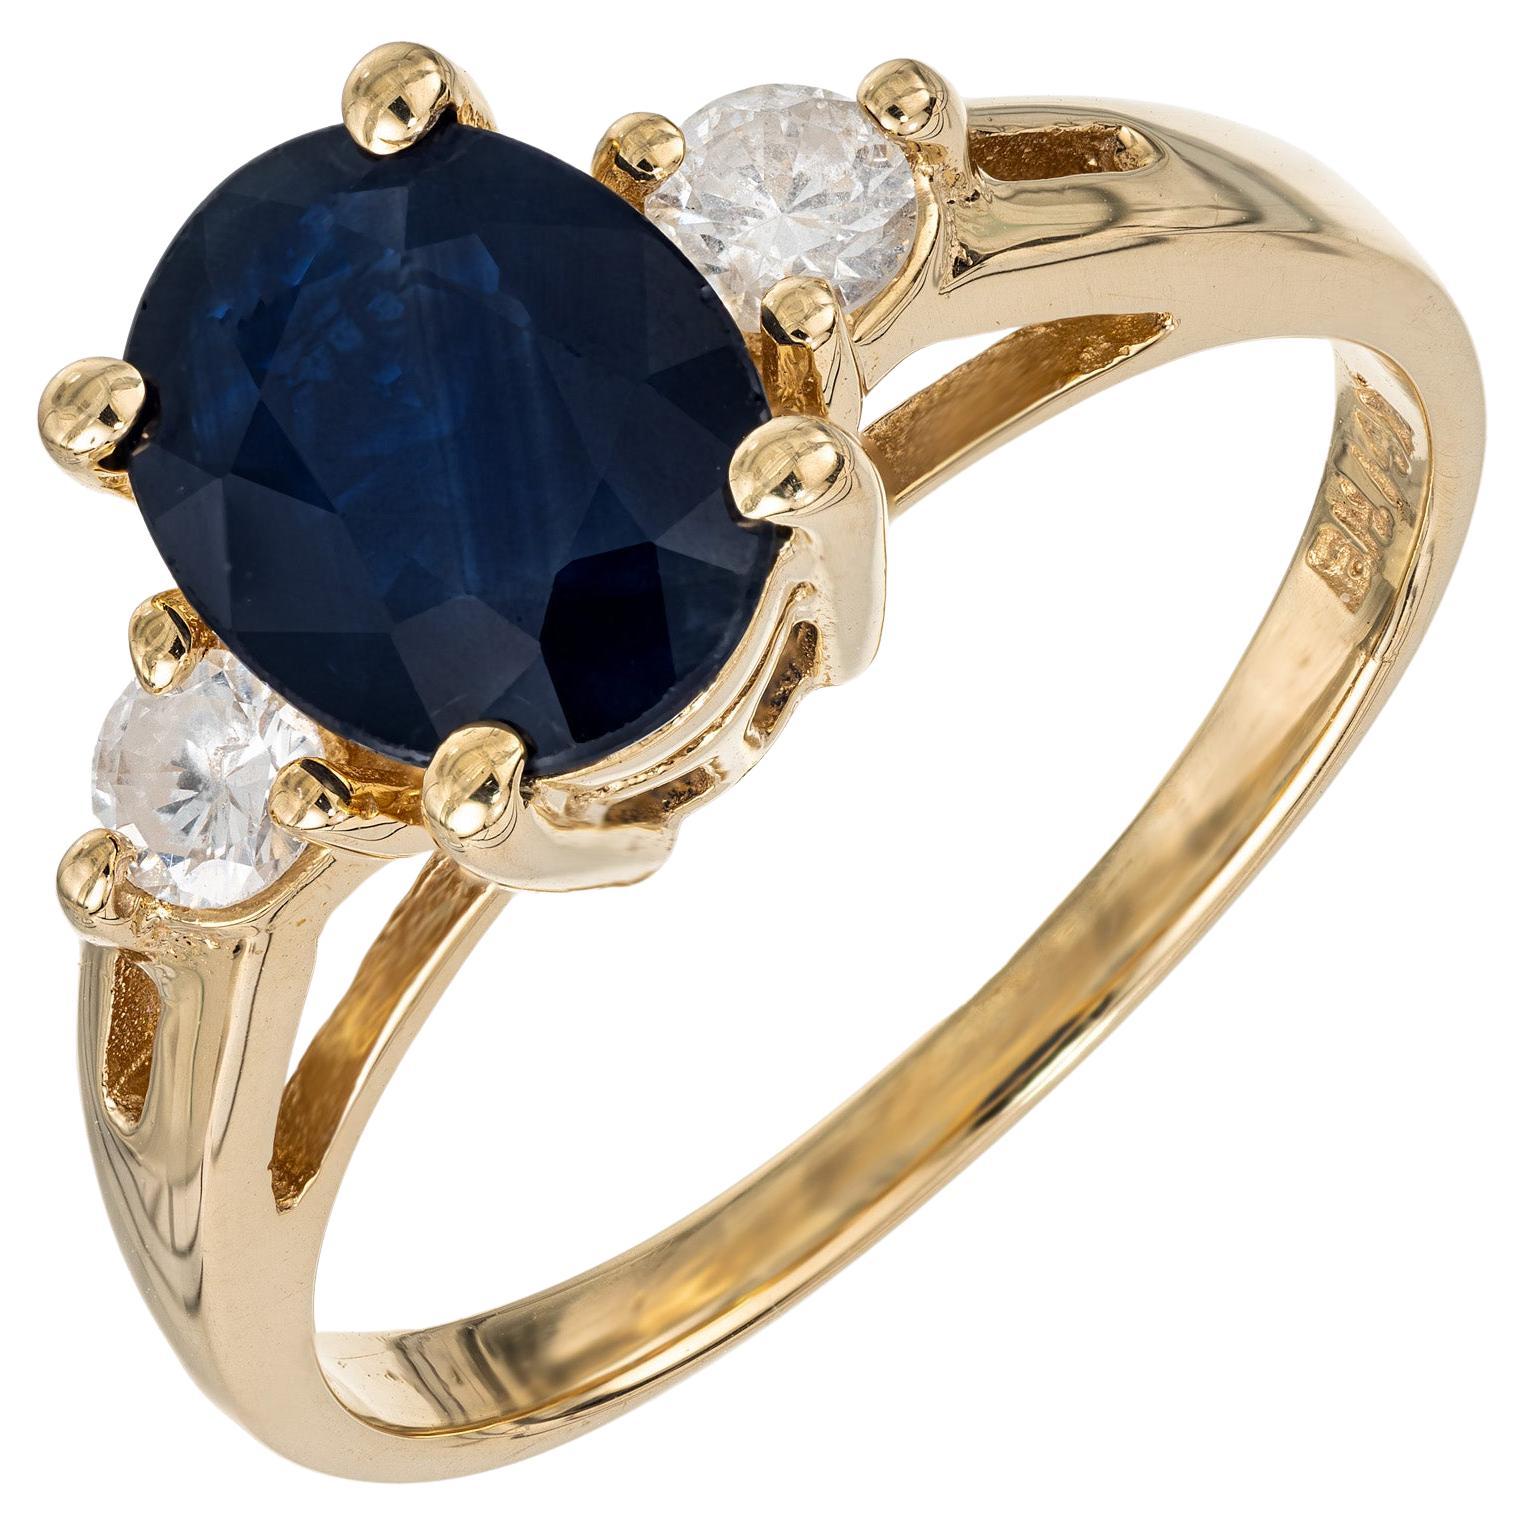 GIA Certified 1.50 Carat Oval Sapphire Diamond Gold Three-Stone Engagement Ring 